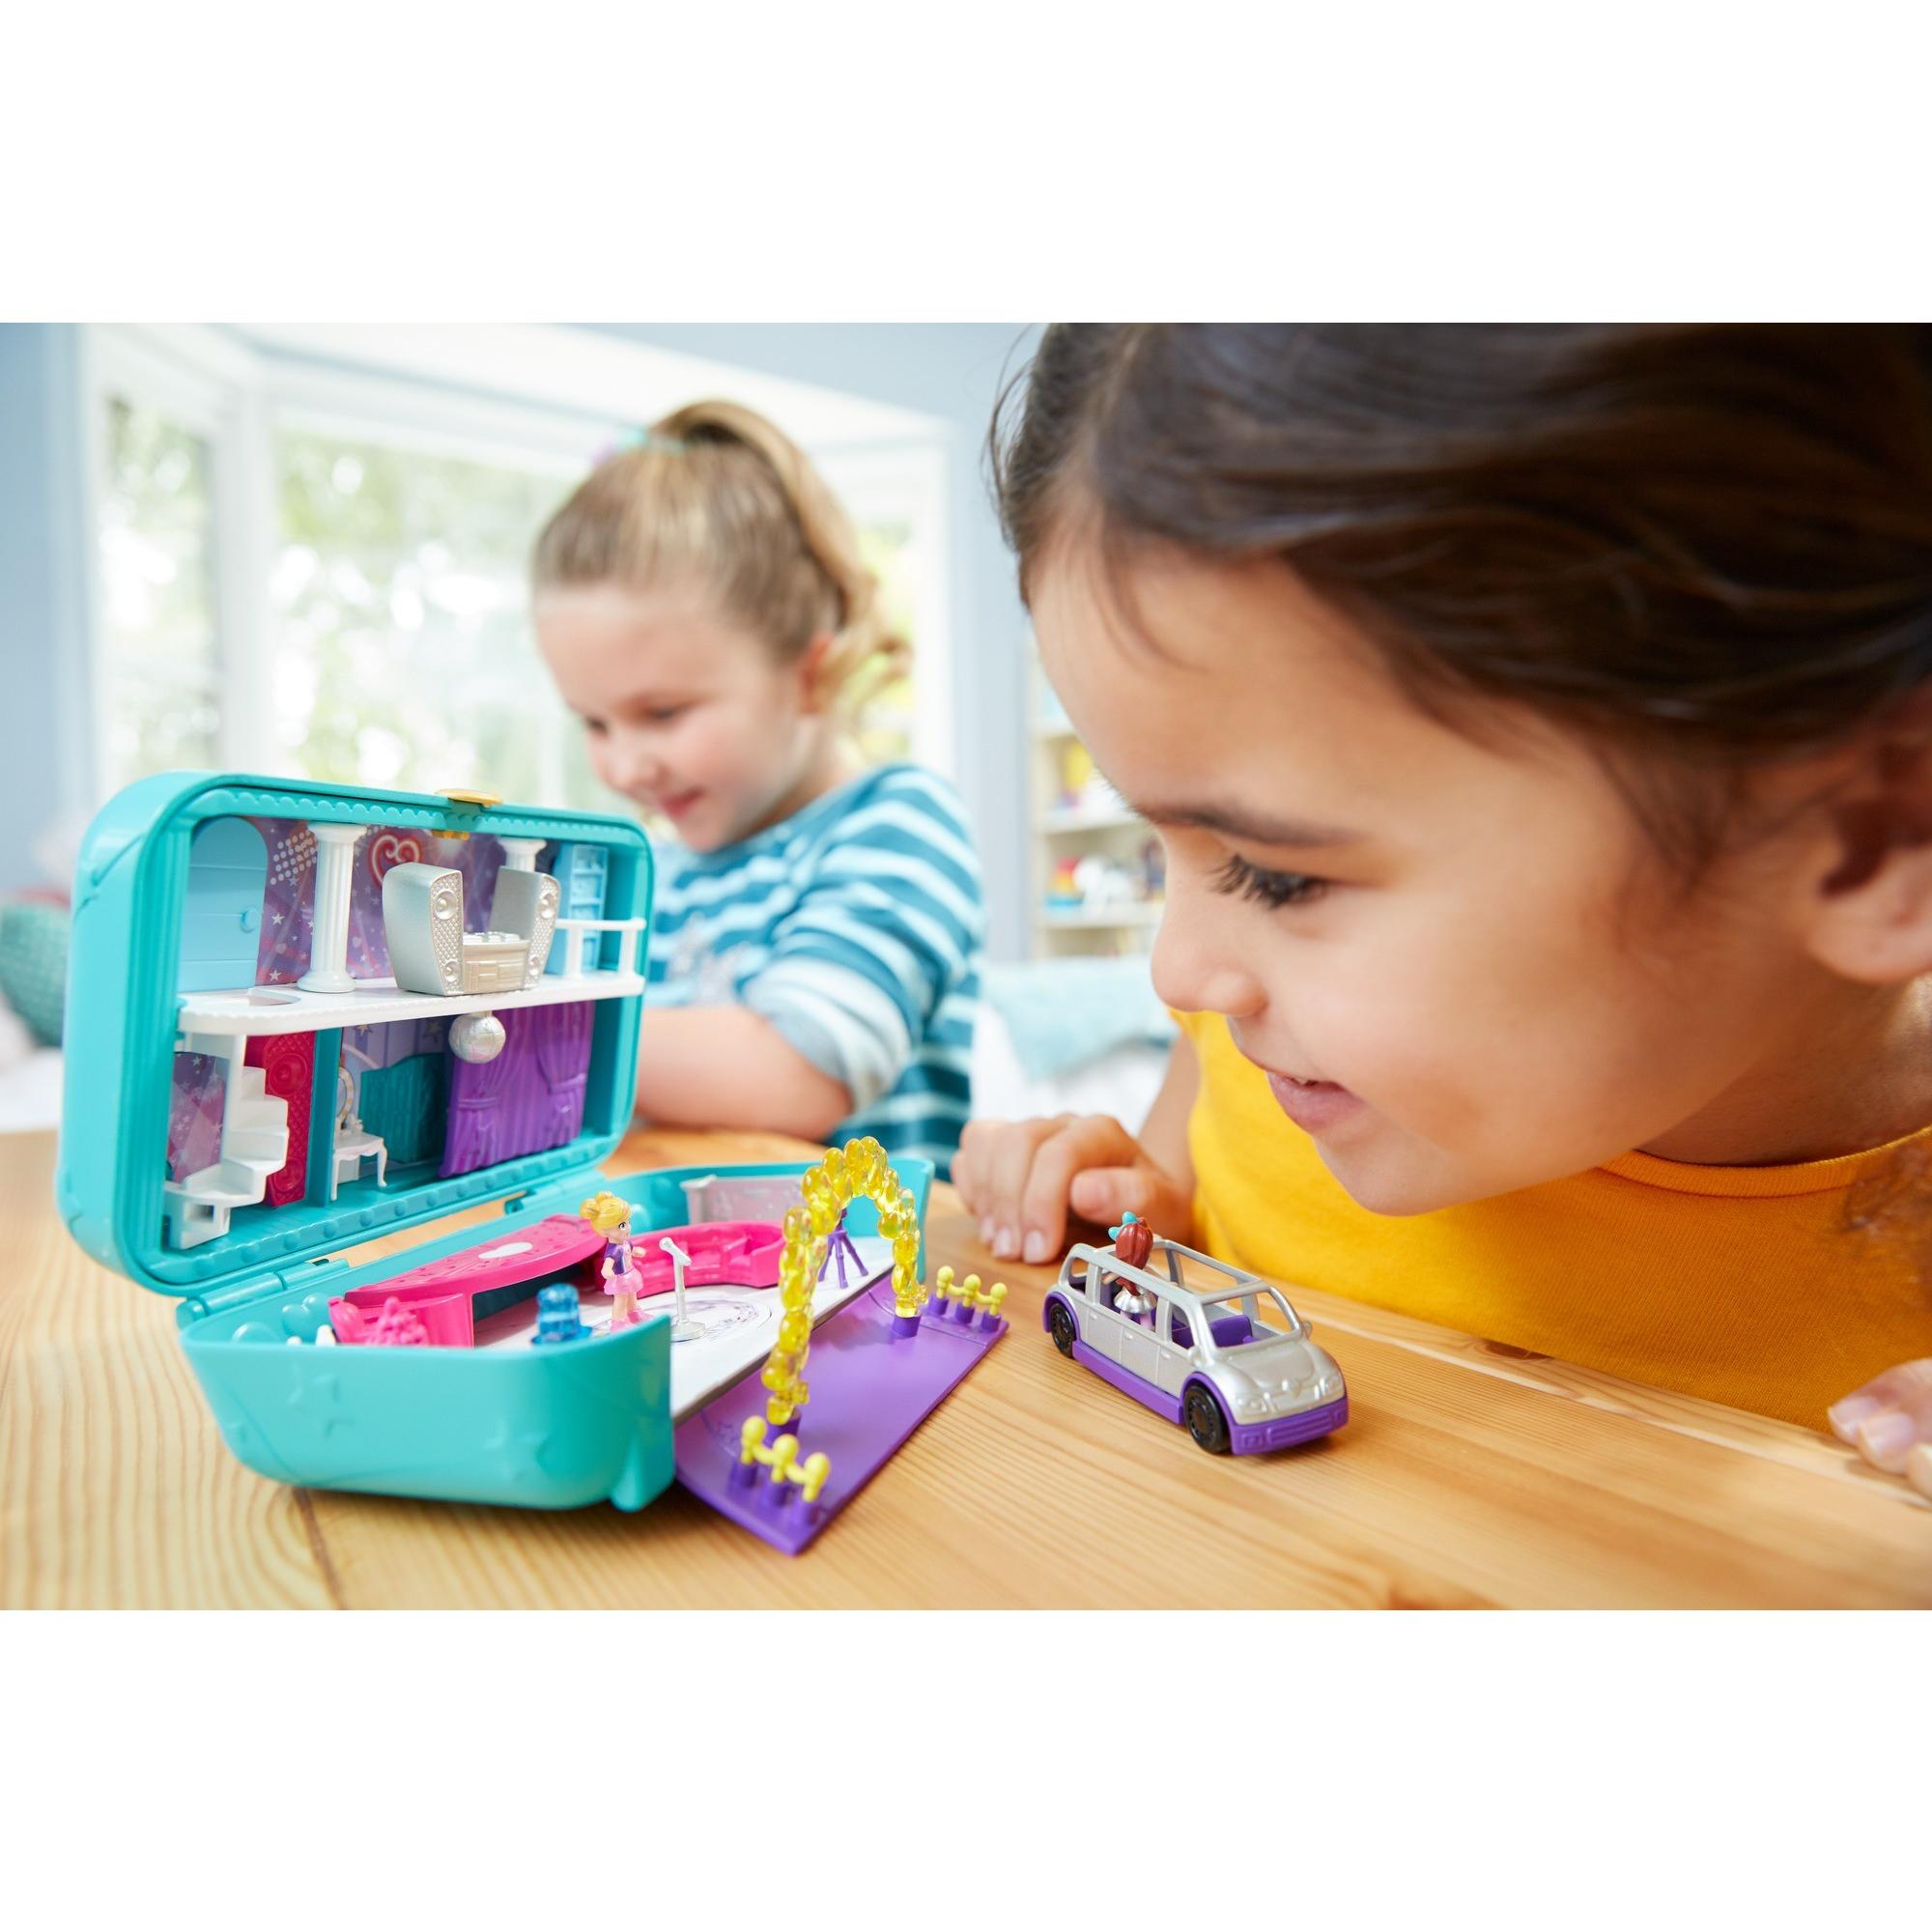 Polly Pocket Hidden Places Dance Par-taay! Compact with Accessories - image 3 of 10